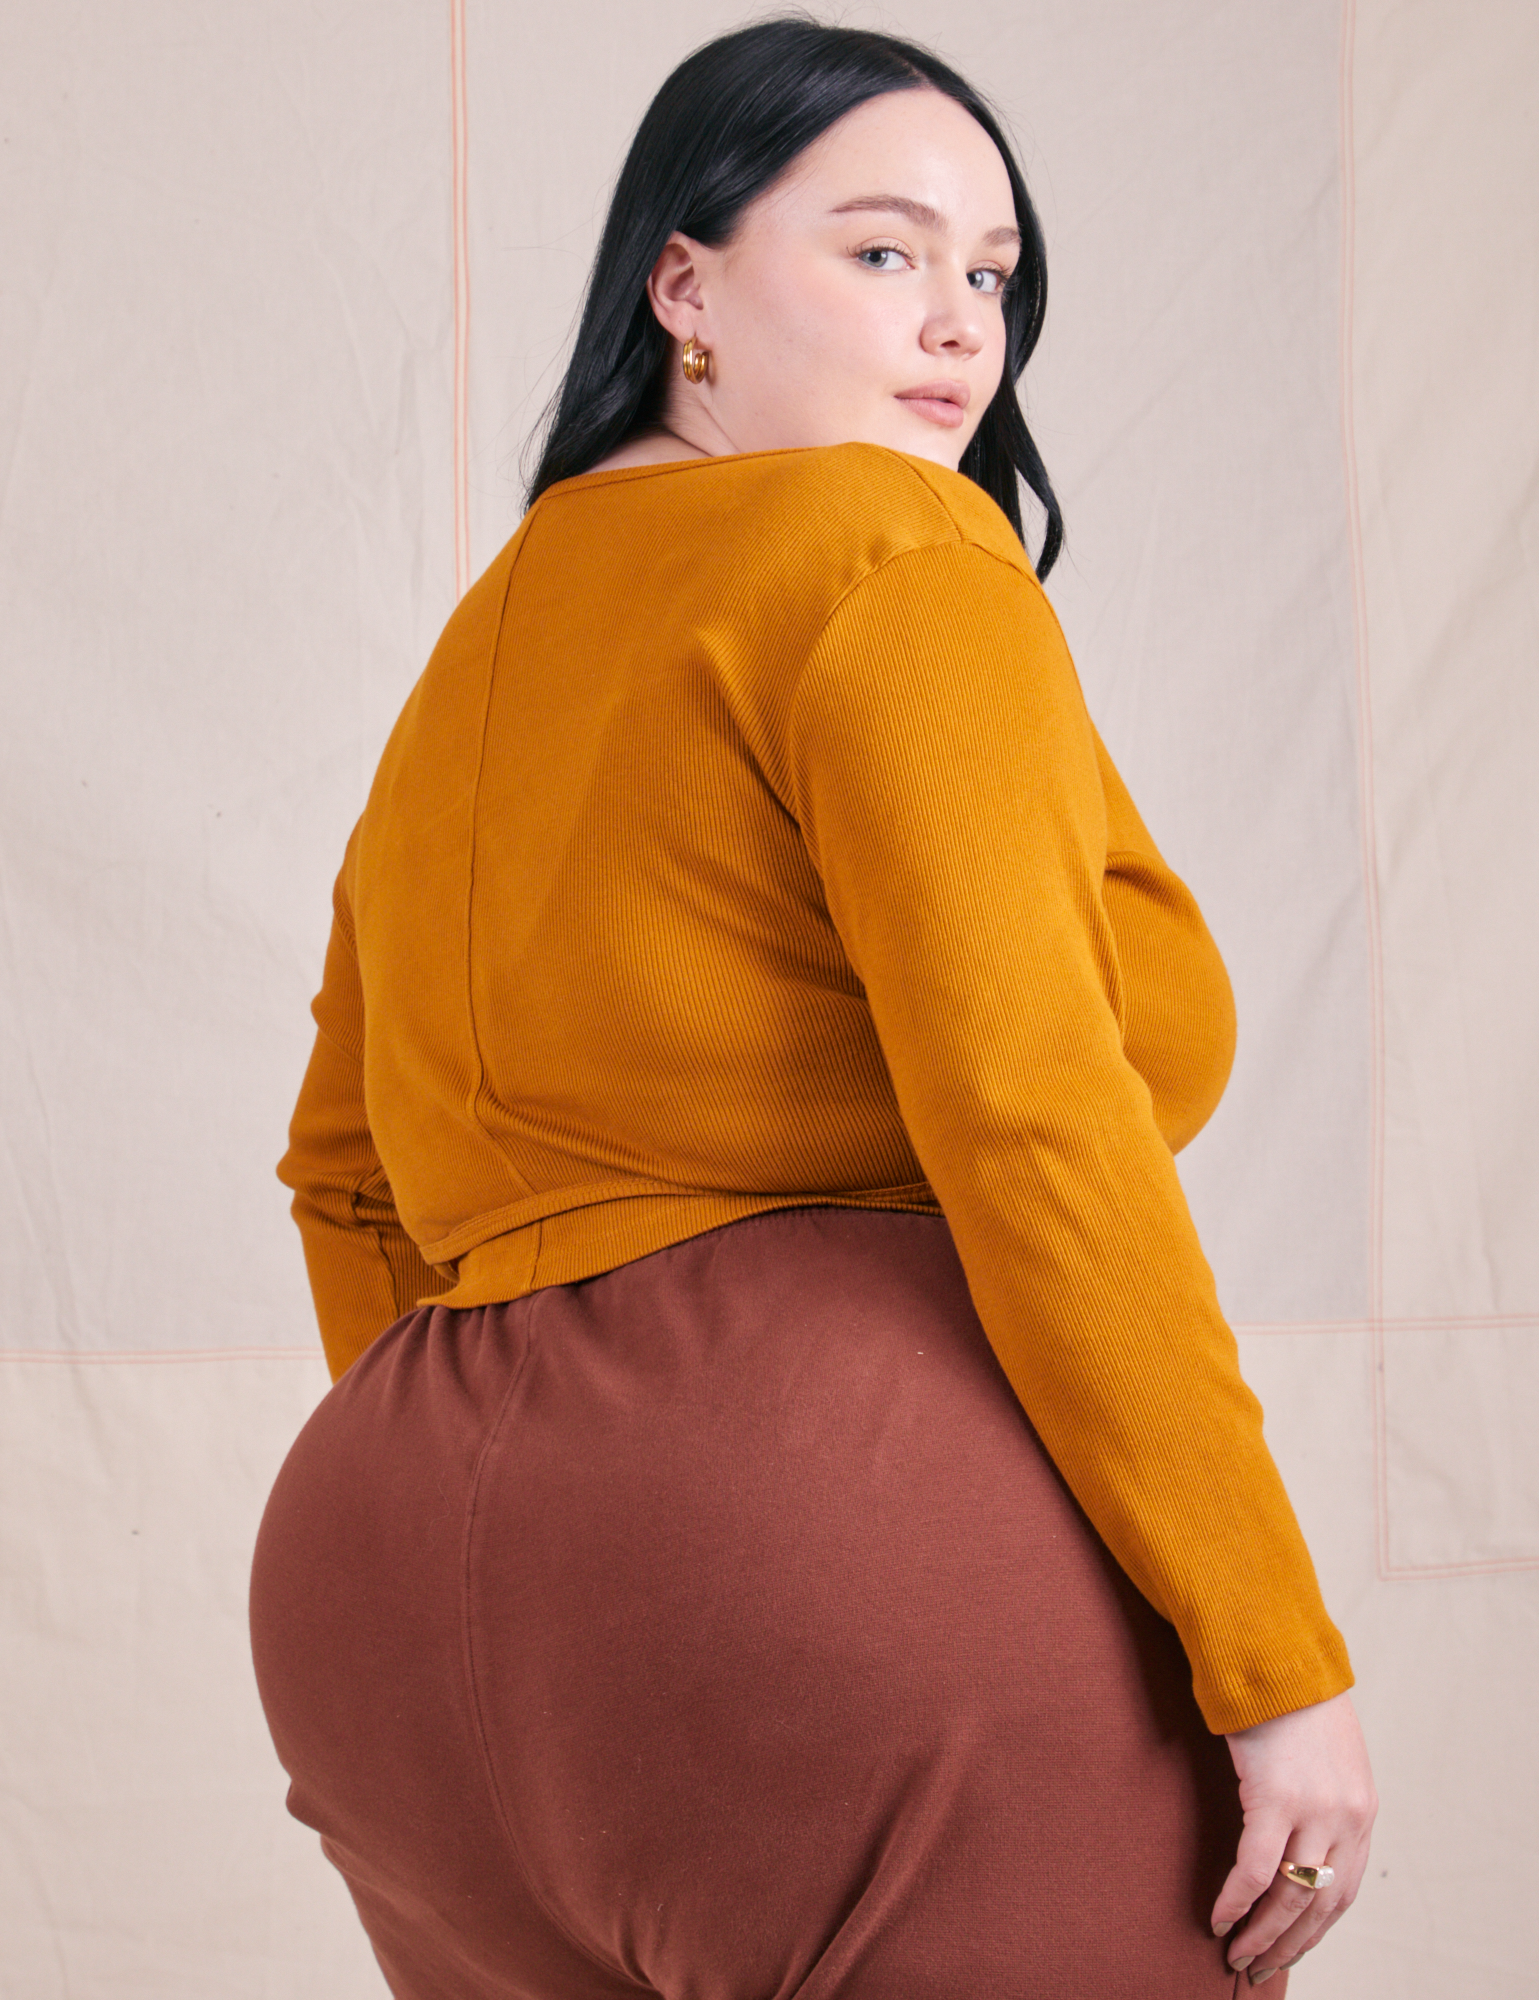 Wrap Top in Spicy Mustard angled back view on Kenna